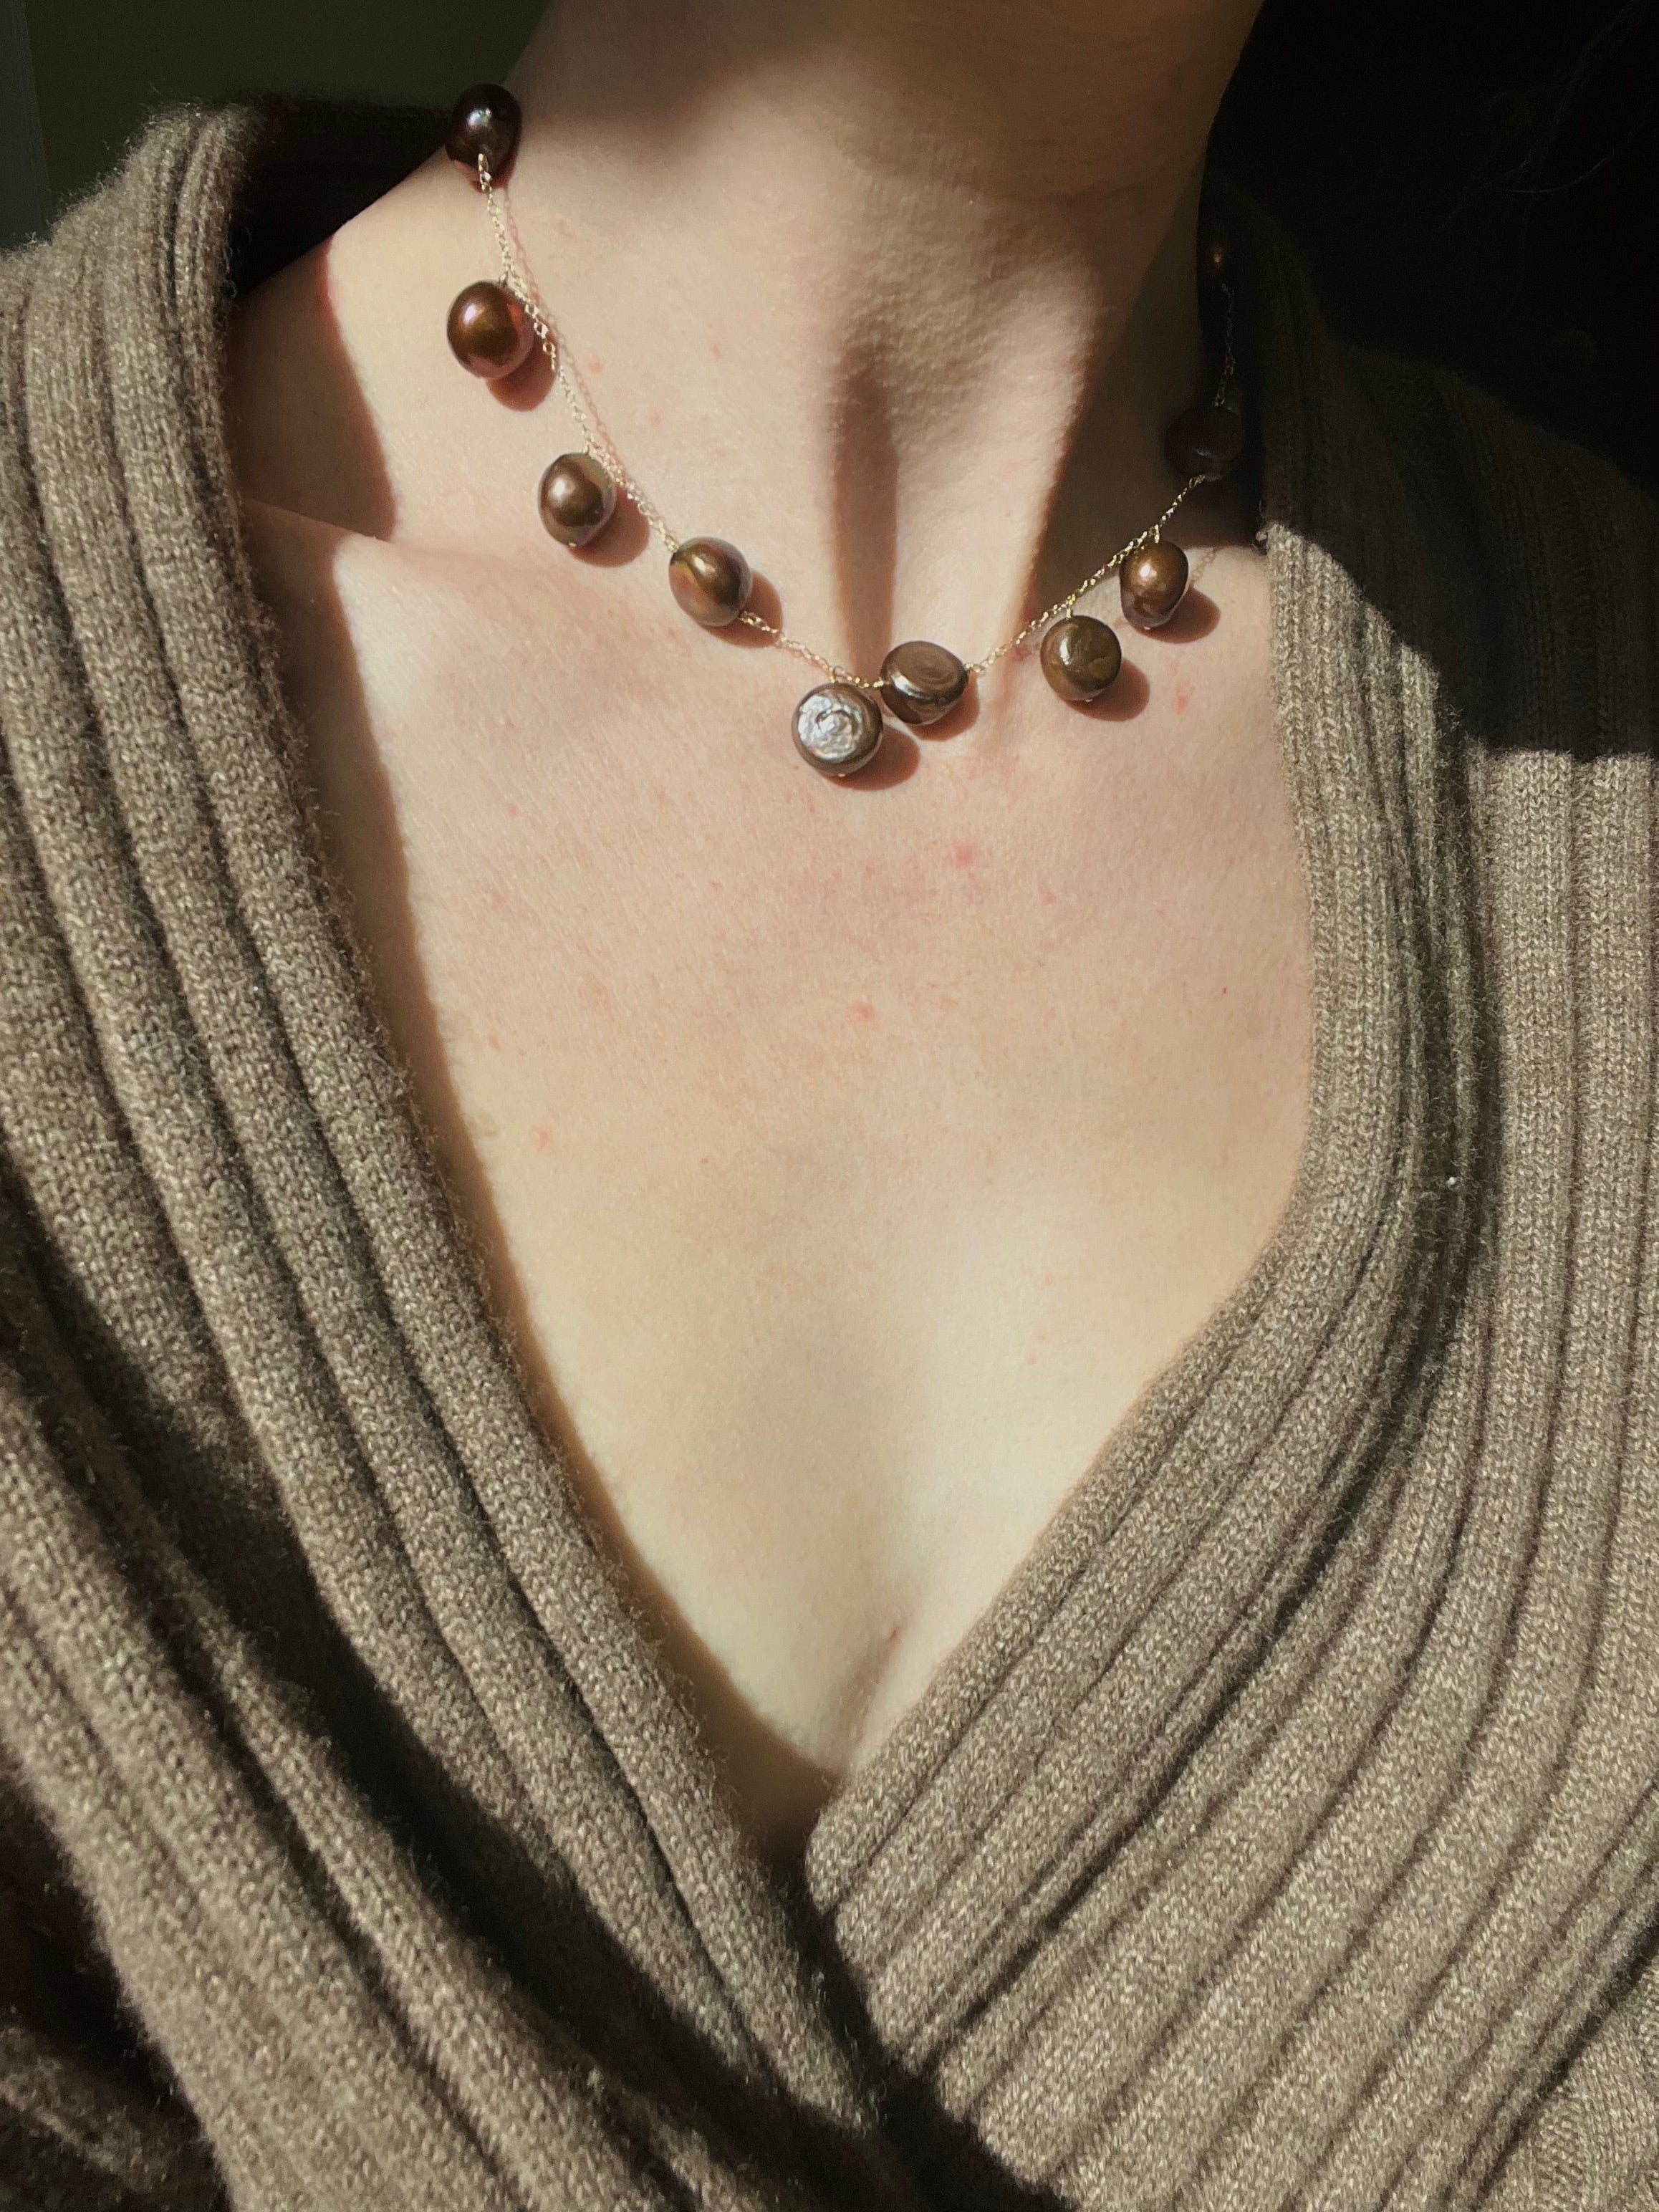 The Chocolate Pearl Necklace